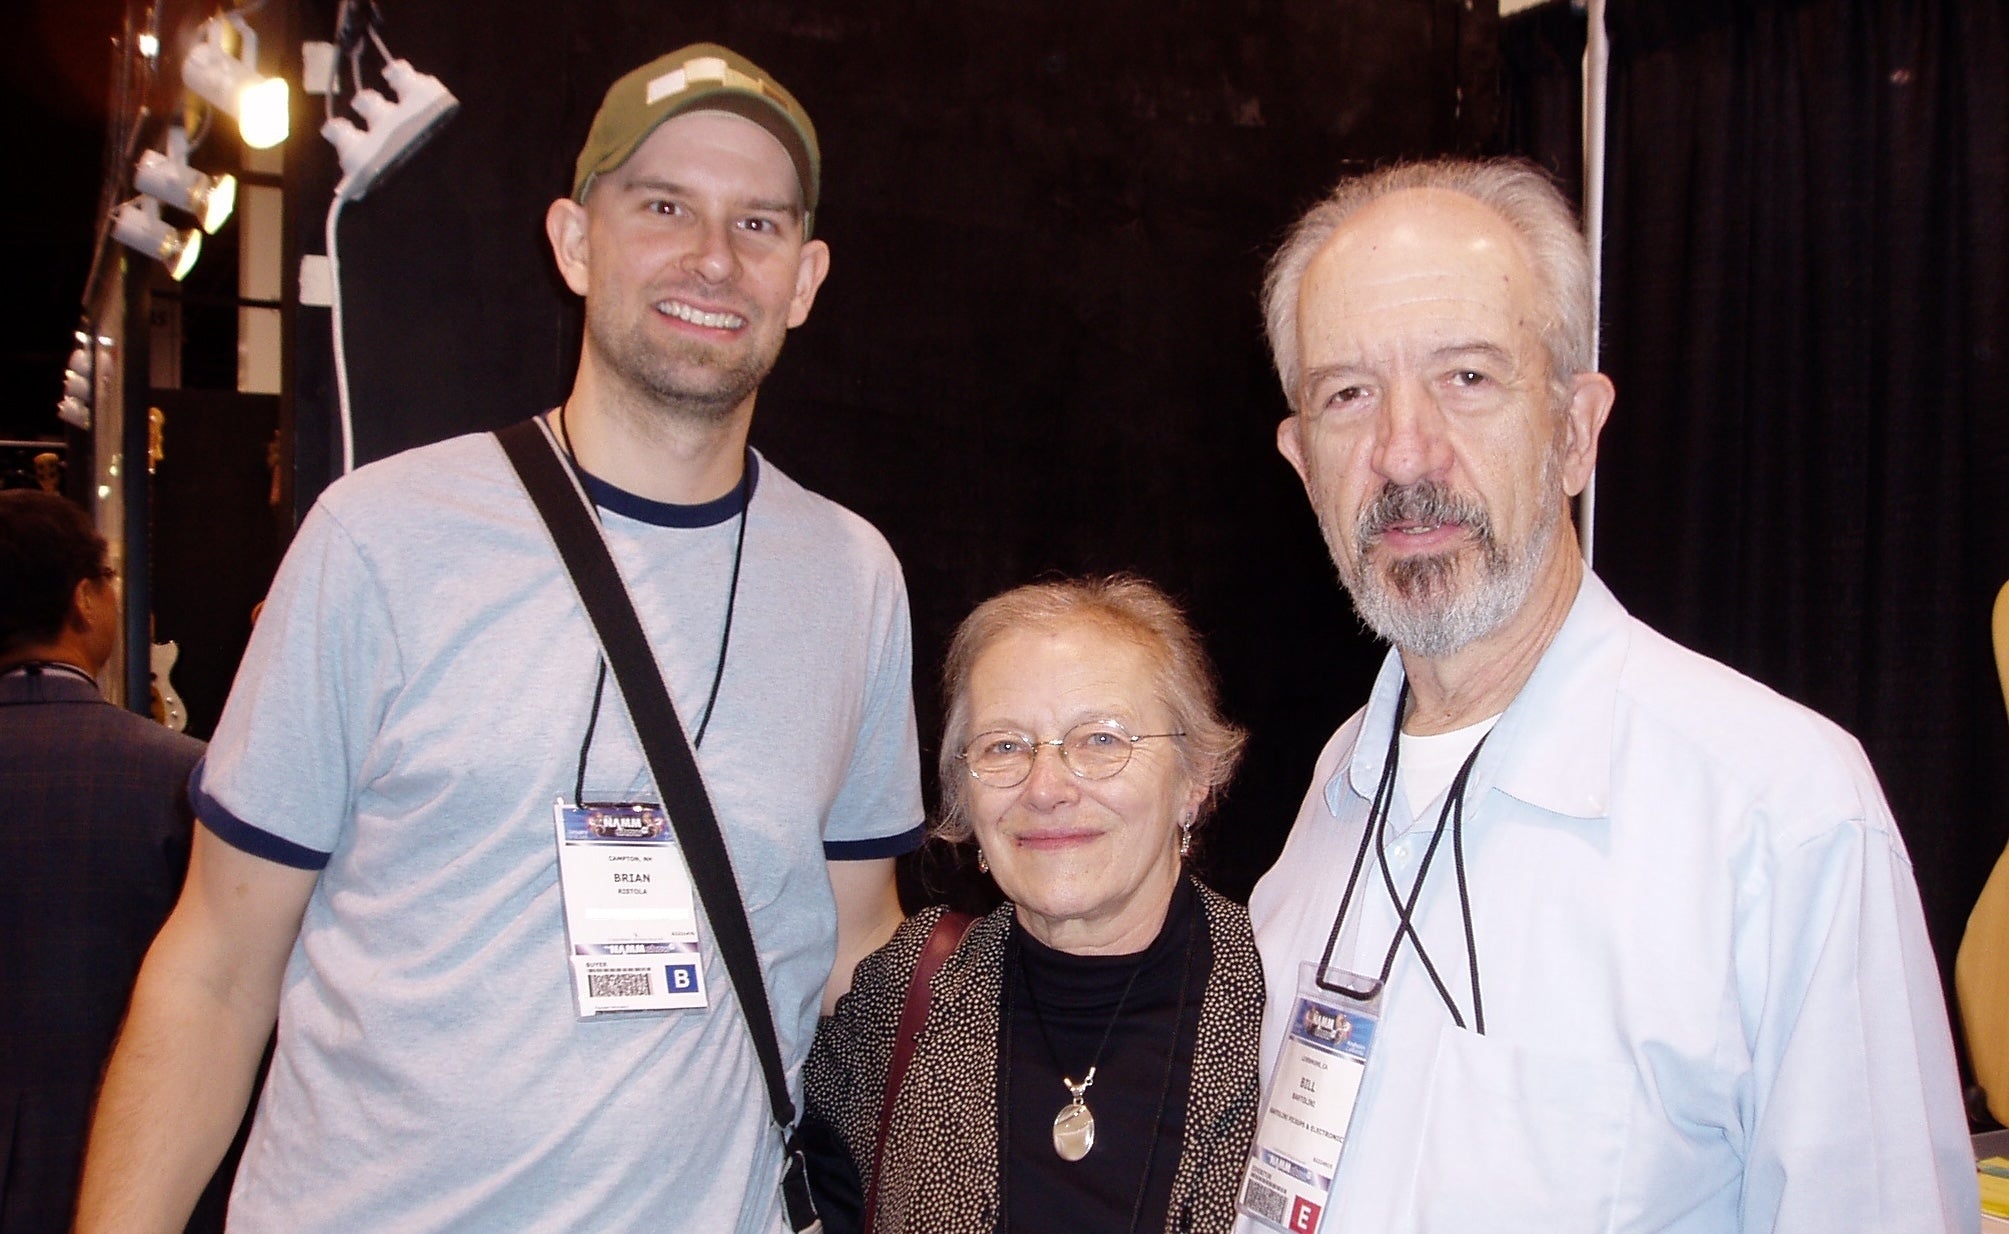 Brian (Co Owner of Fat Bass Tone, LLC) with Pat and Bill Bartolini at The NAMM Show 2008